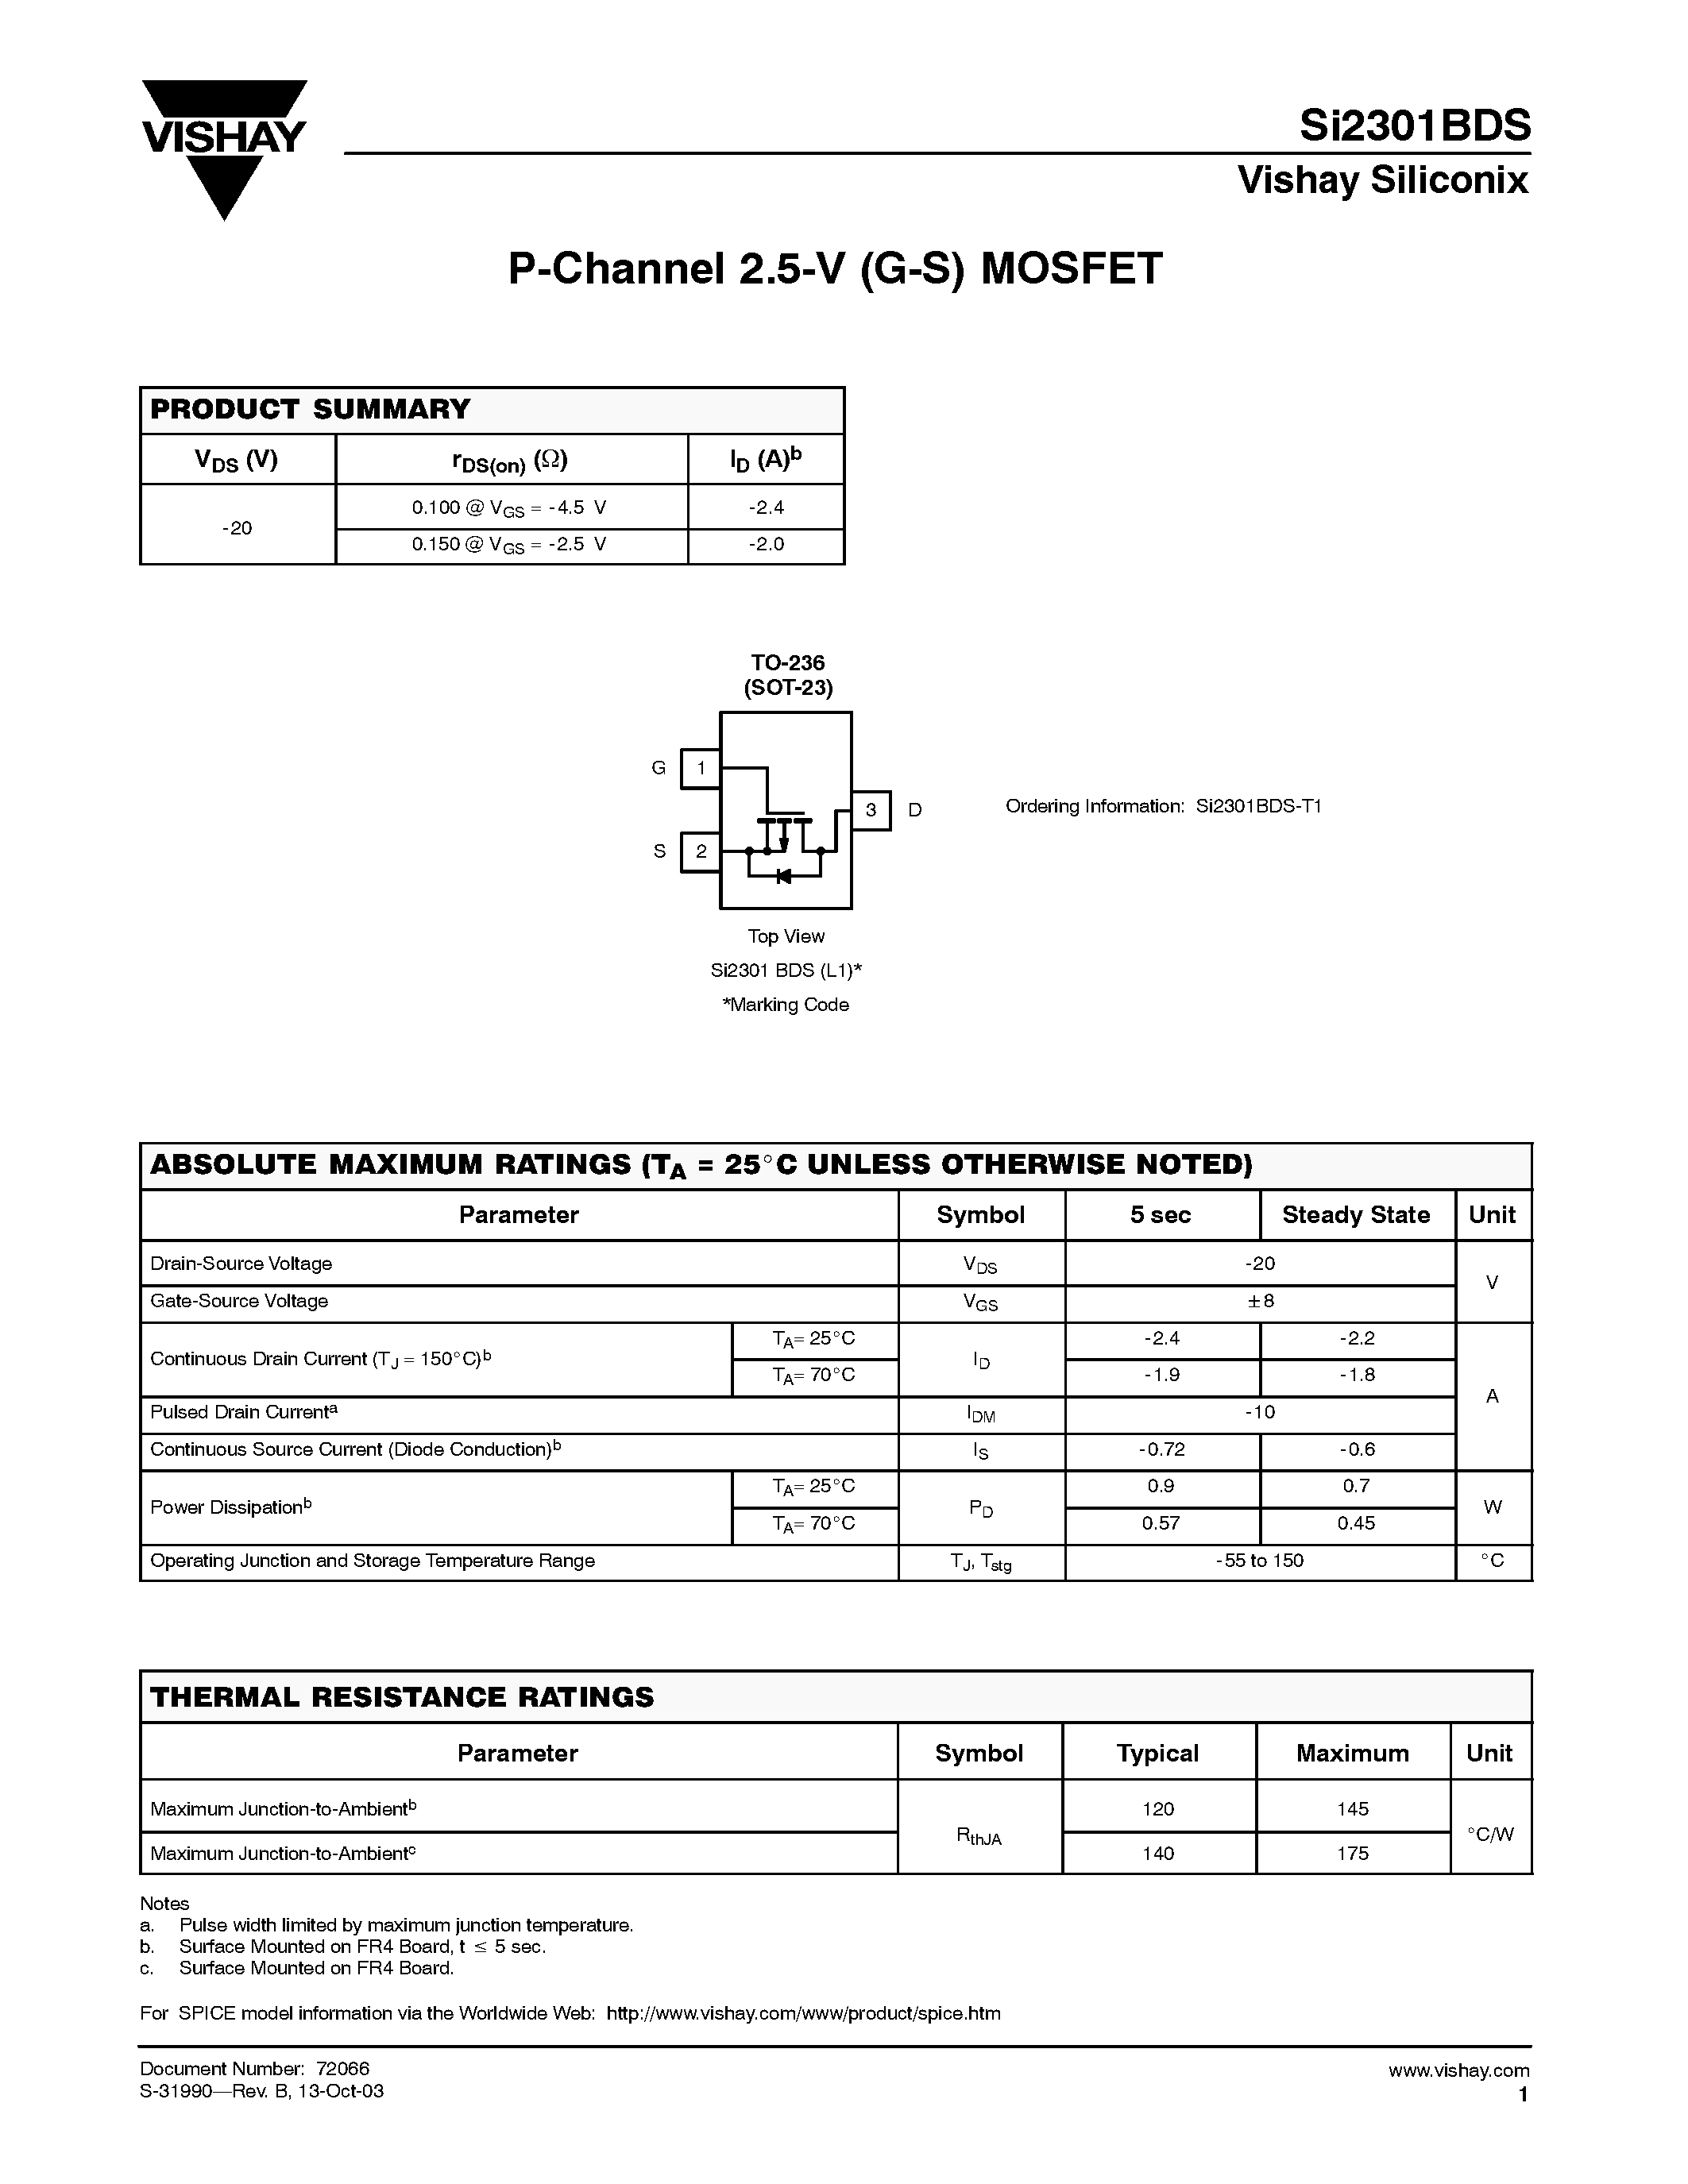 Даташит Si2301BDS-T1 - P-Channel 2.5-V (G-S) MOSFET страница 1